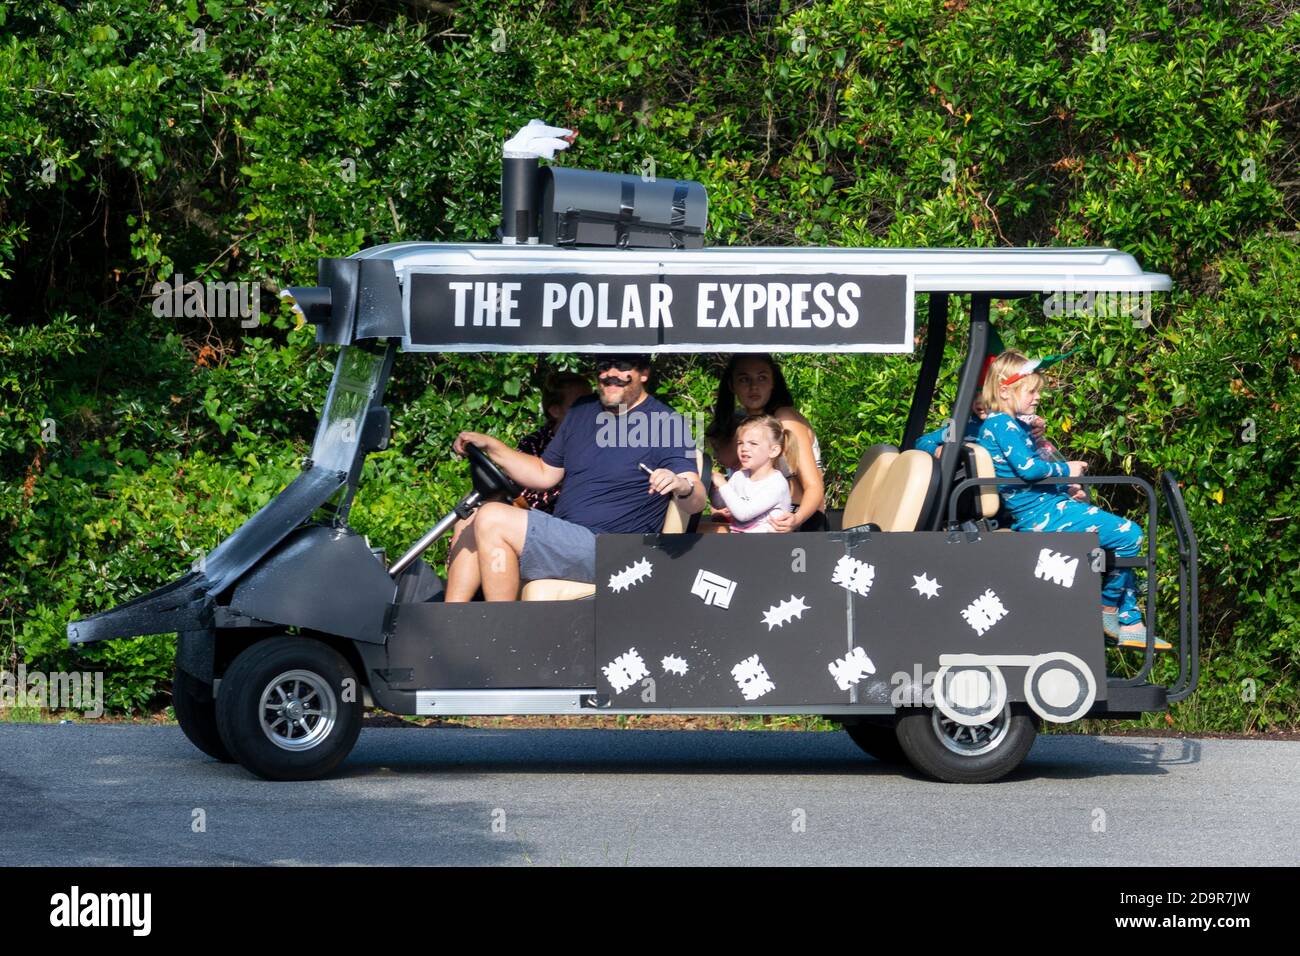 A golf cart float decorated as a the Polar Express rides down the road during the annual Independence Day parade July 4, 2019 in Sullivan's Island, South Carolina. The tiny affluent Sea Island beach community across from Charleston holds an outsized golf cart parade featuring more than 75 decorated carts. Stock Photo